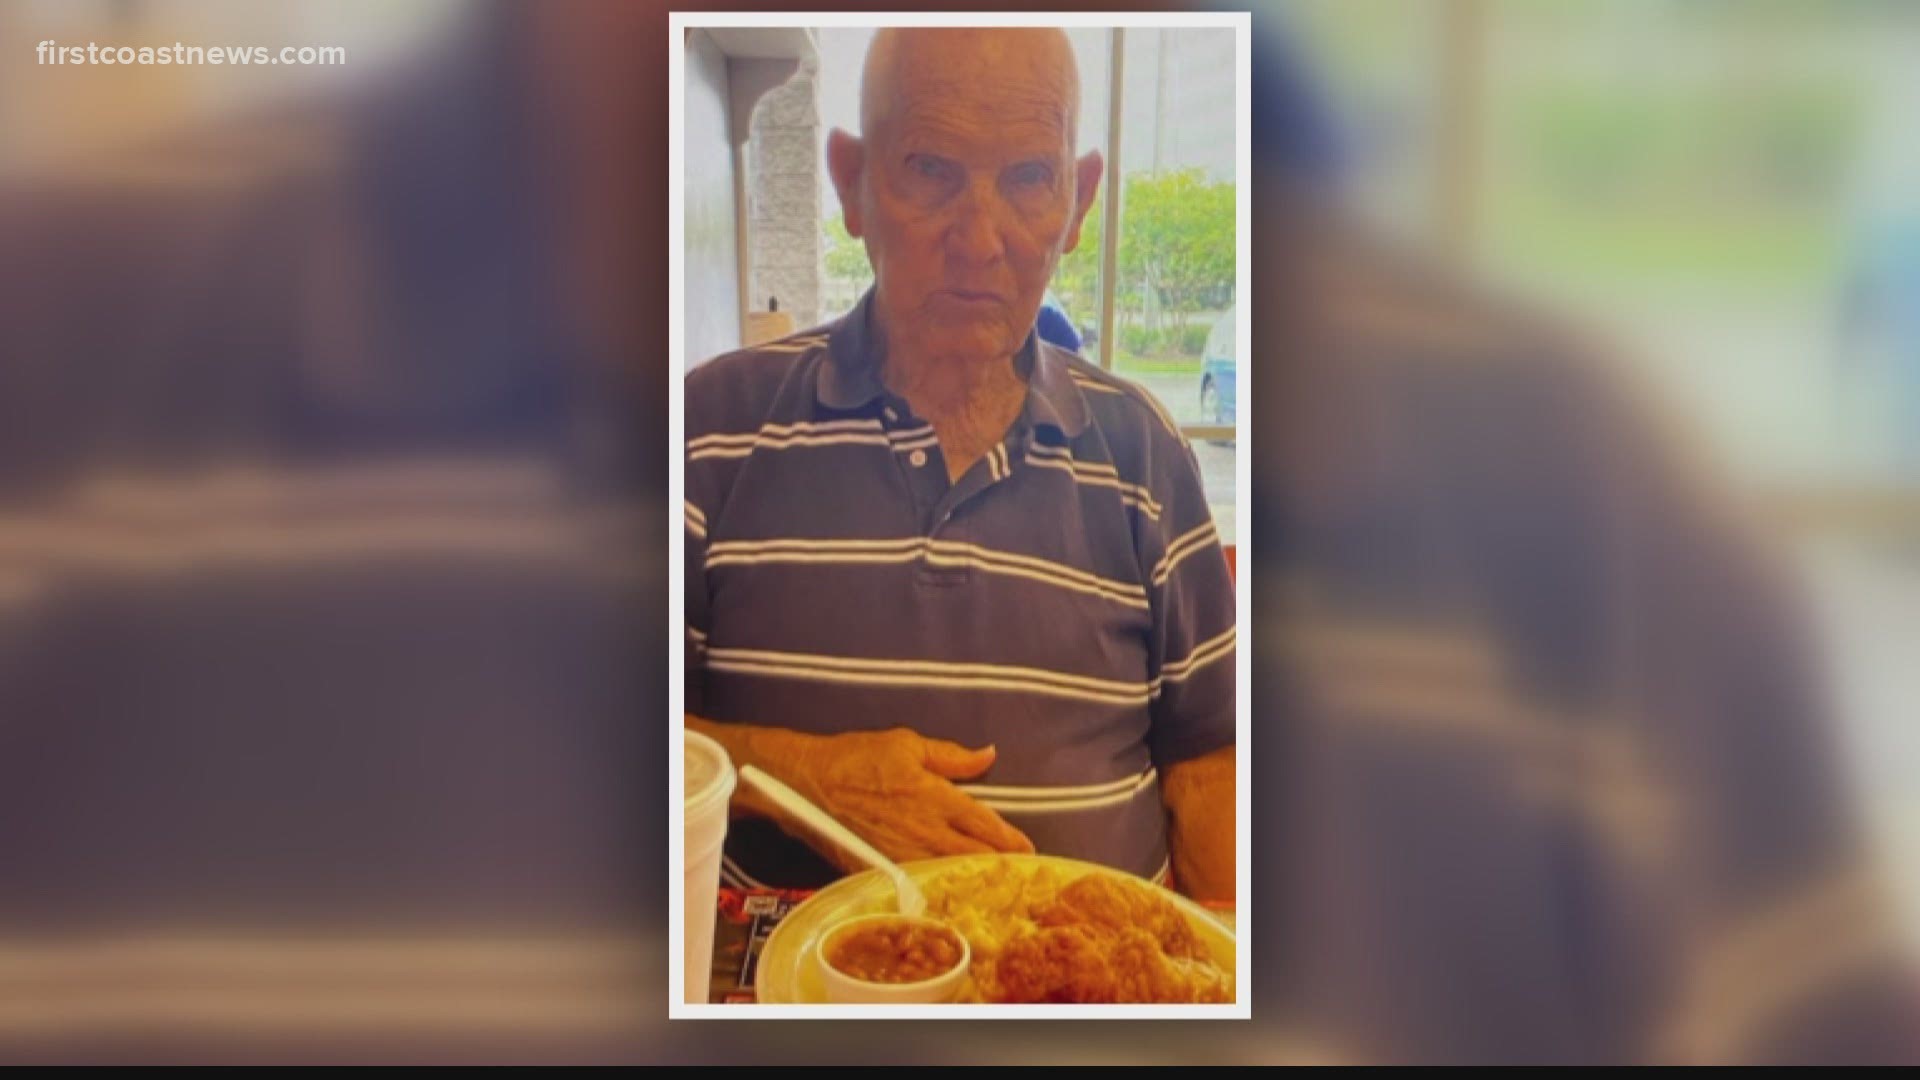 The Nassau County Sheriff's Office is looking for a missing 92-year-old man with dementia who was last seen in the North Hampton neighborhood.